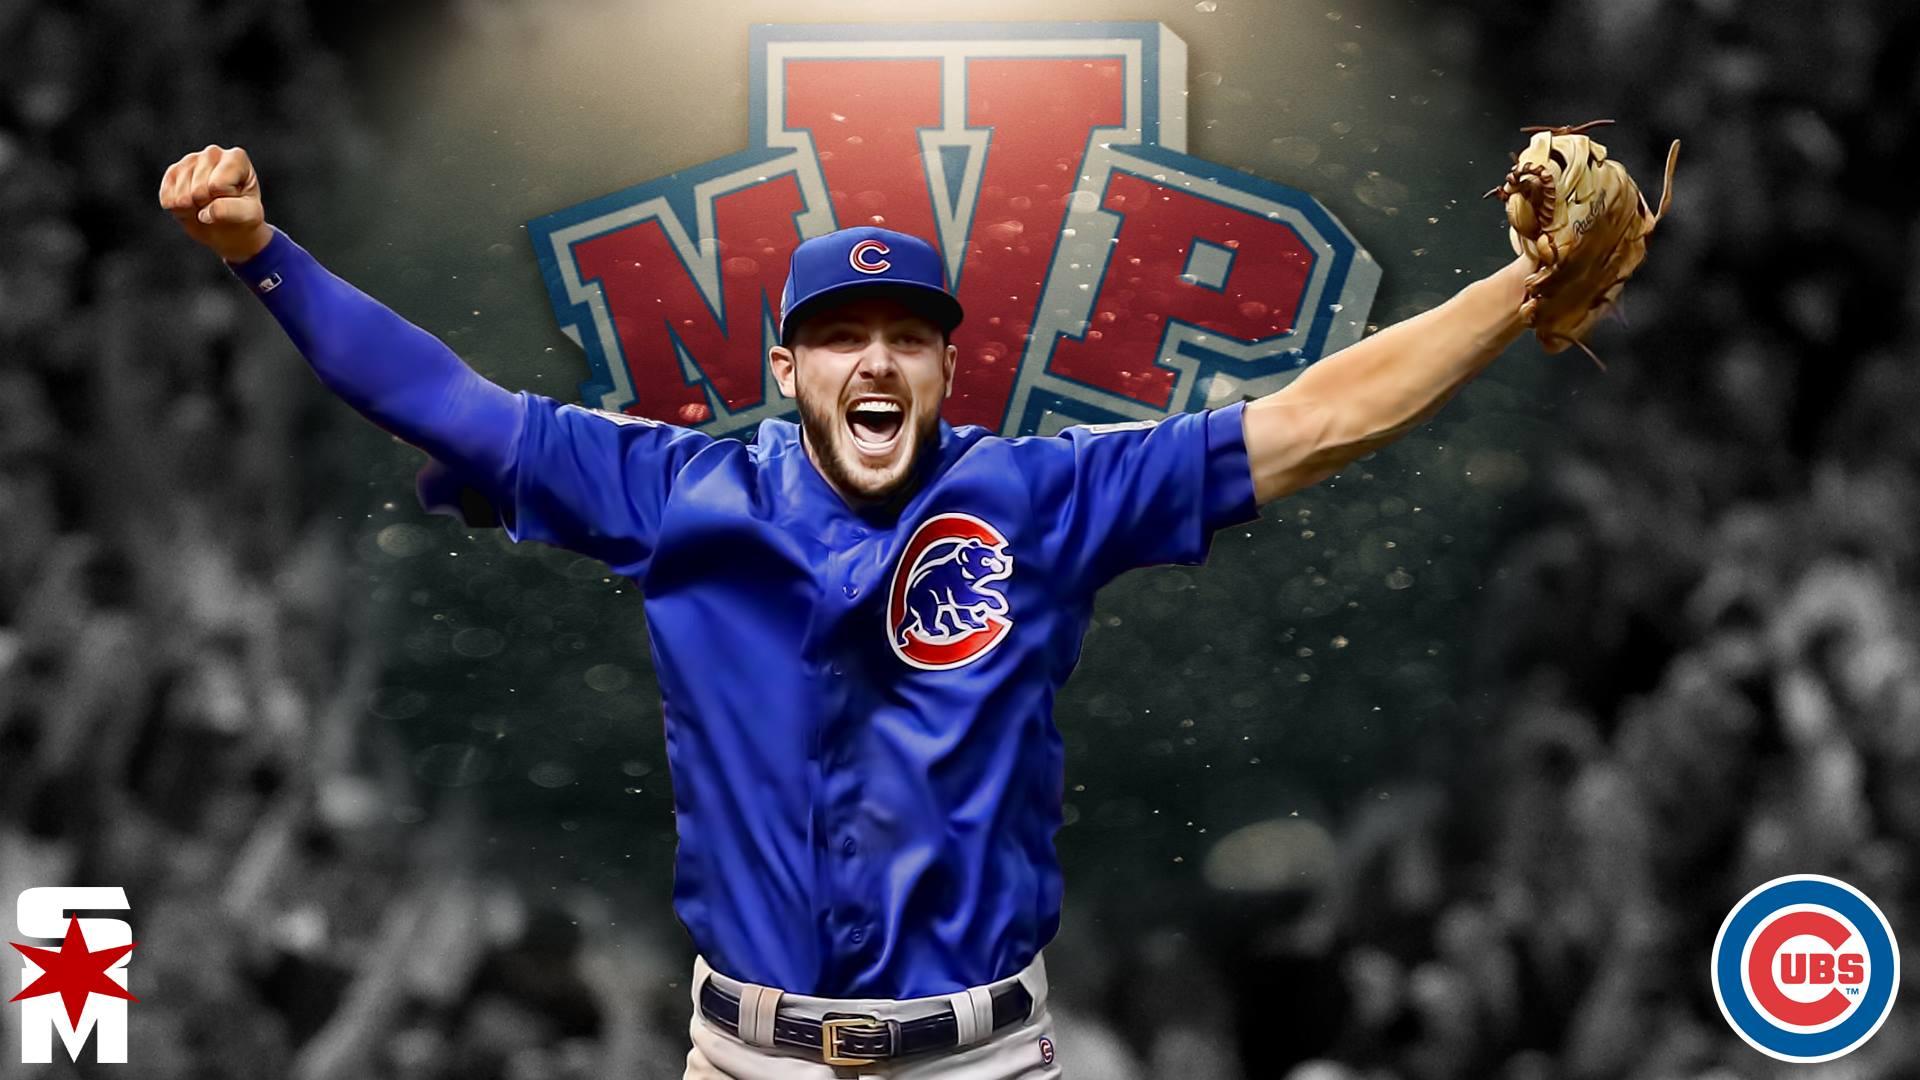 Cubs Sign Kris Bryant To Record